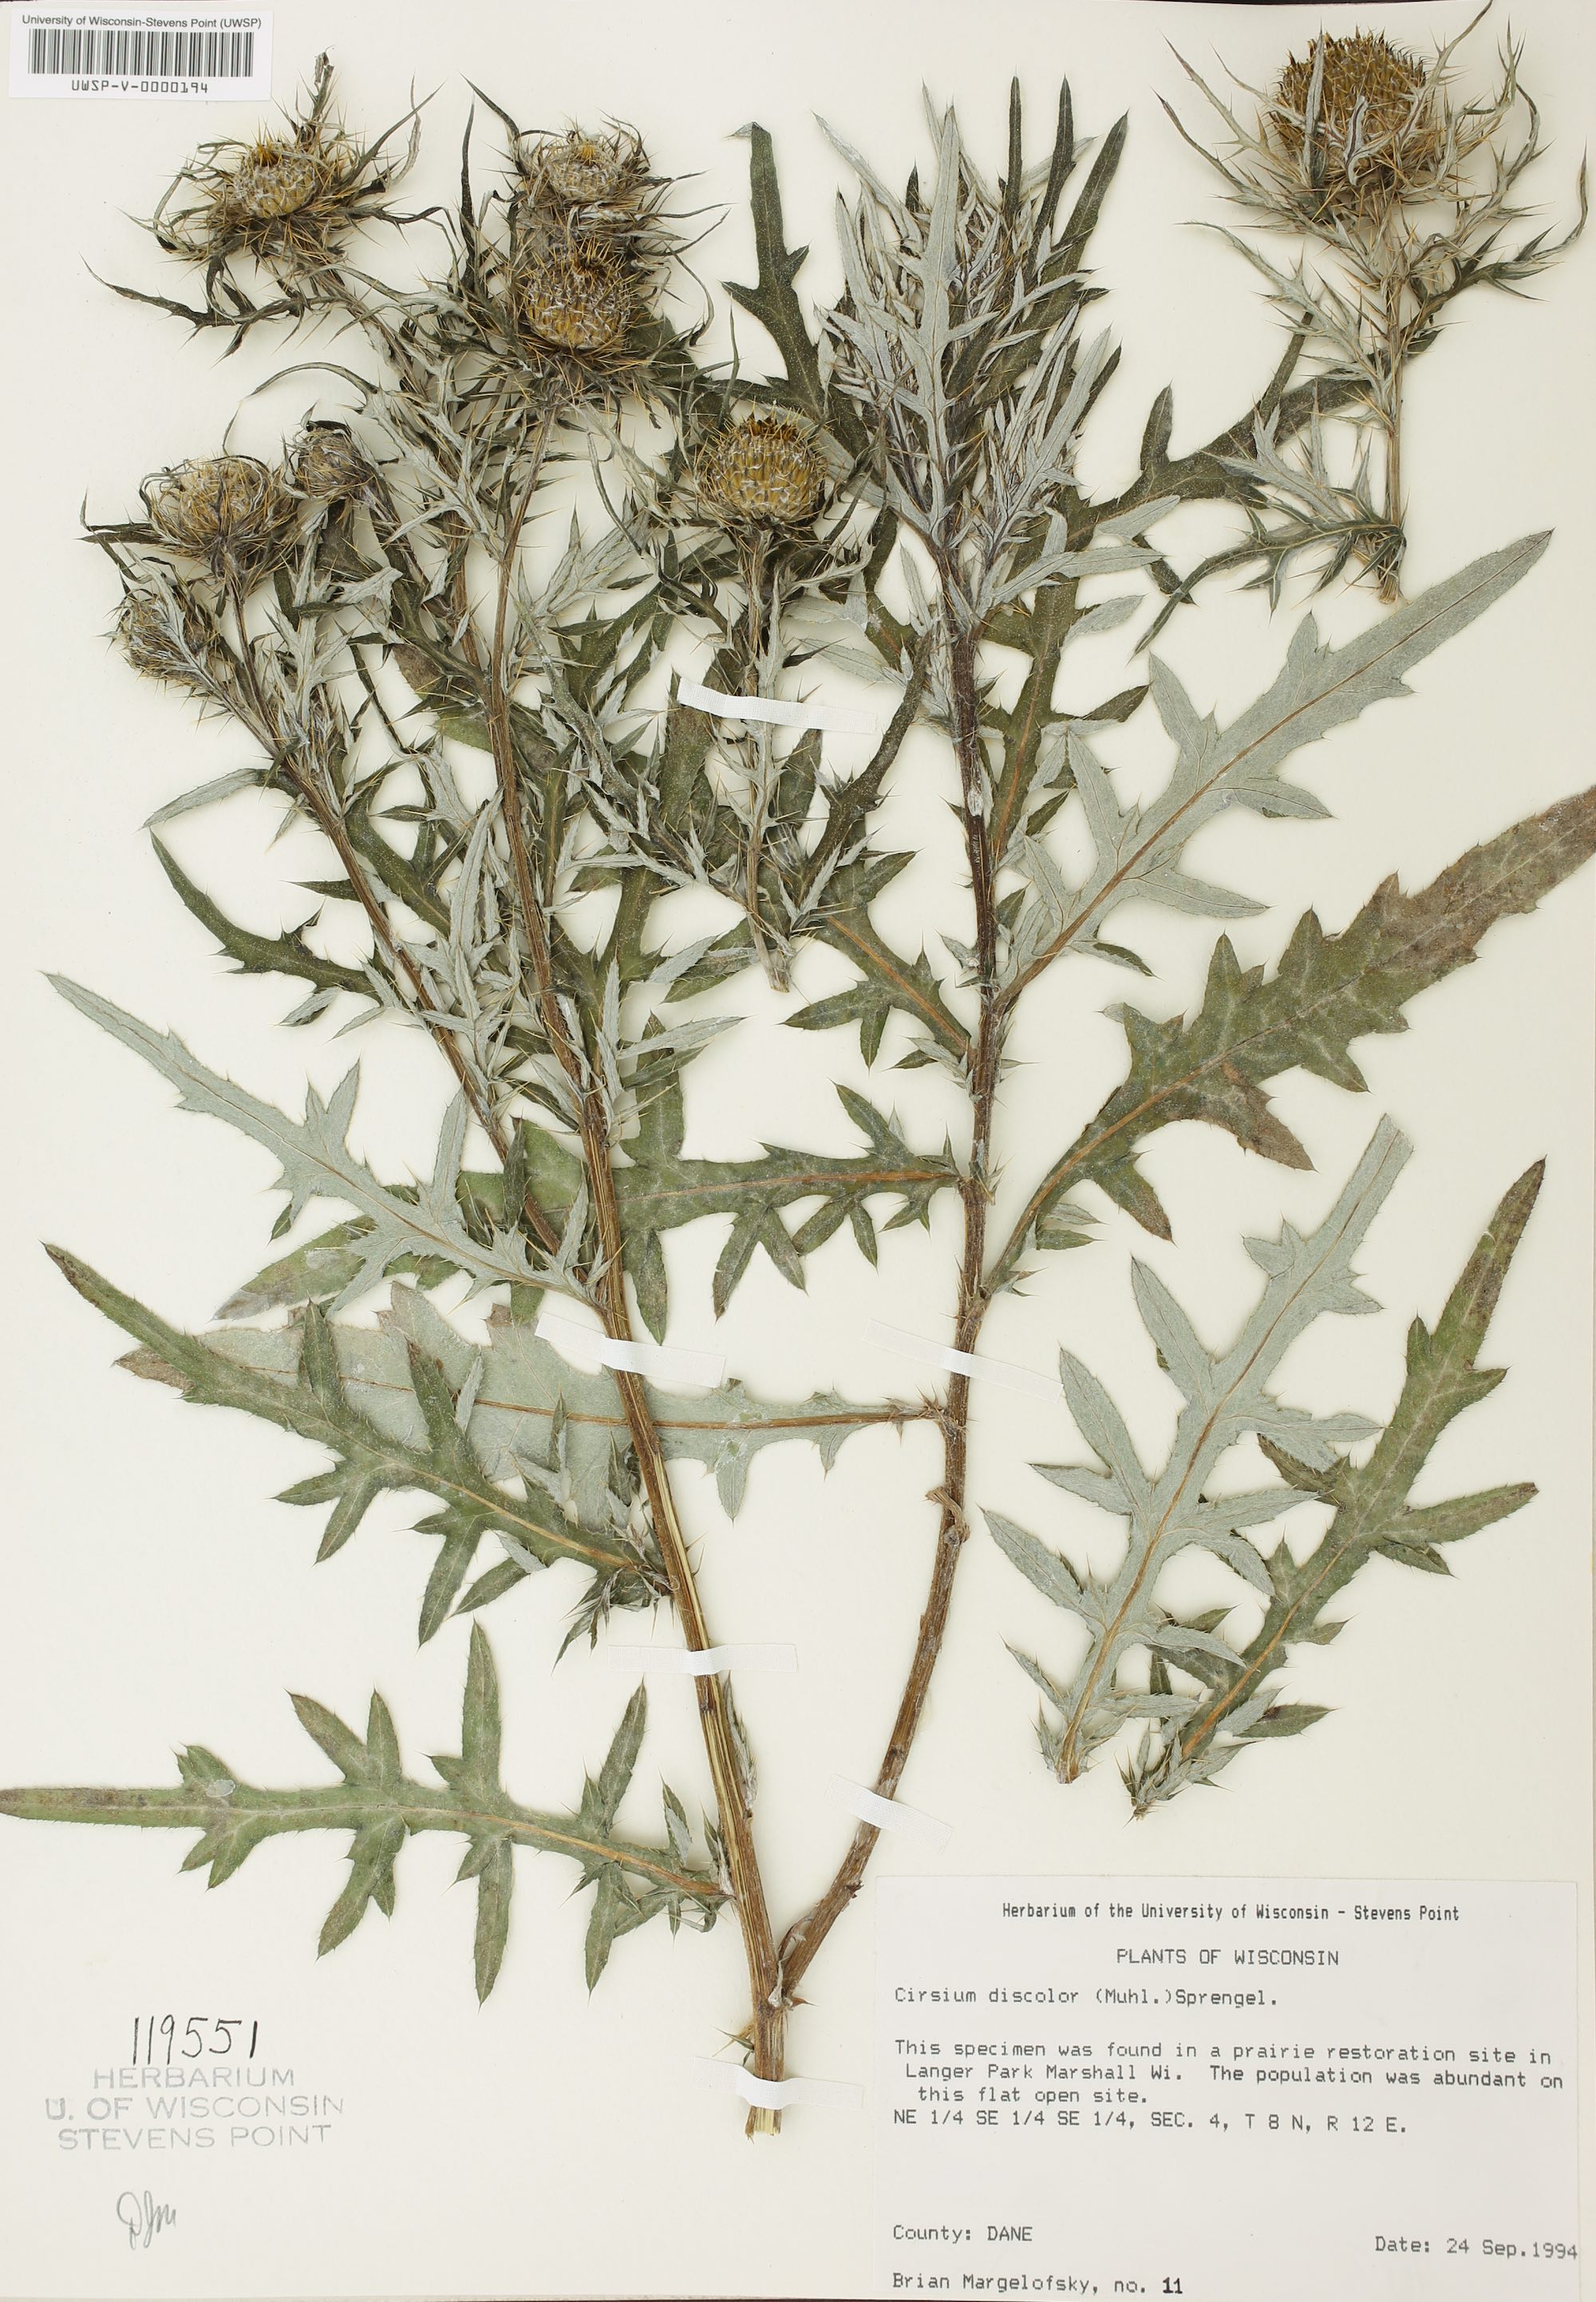 Field Thistle specimen collected.